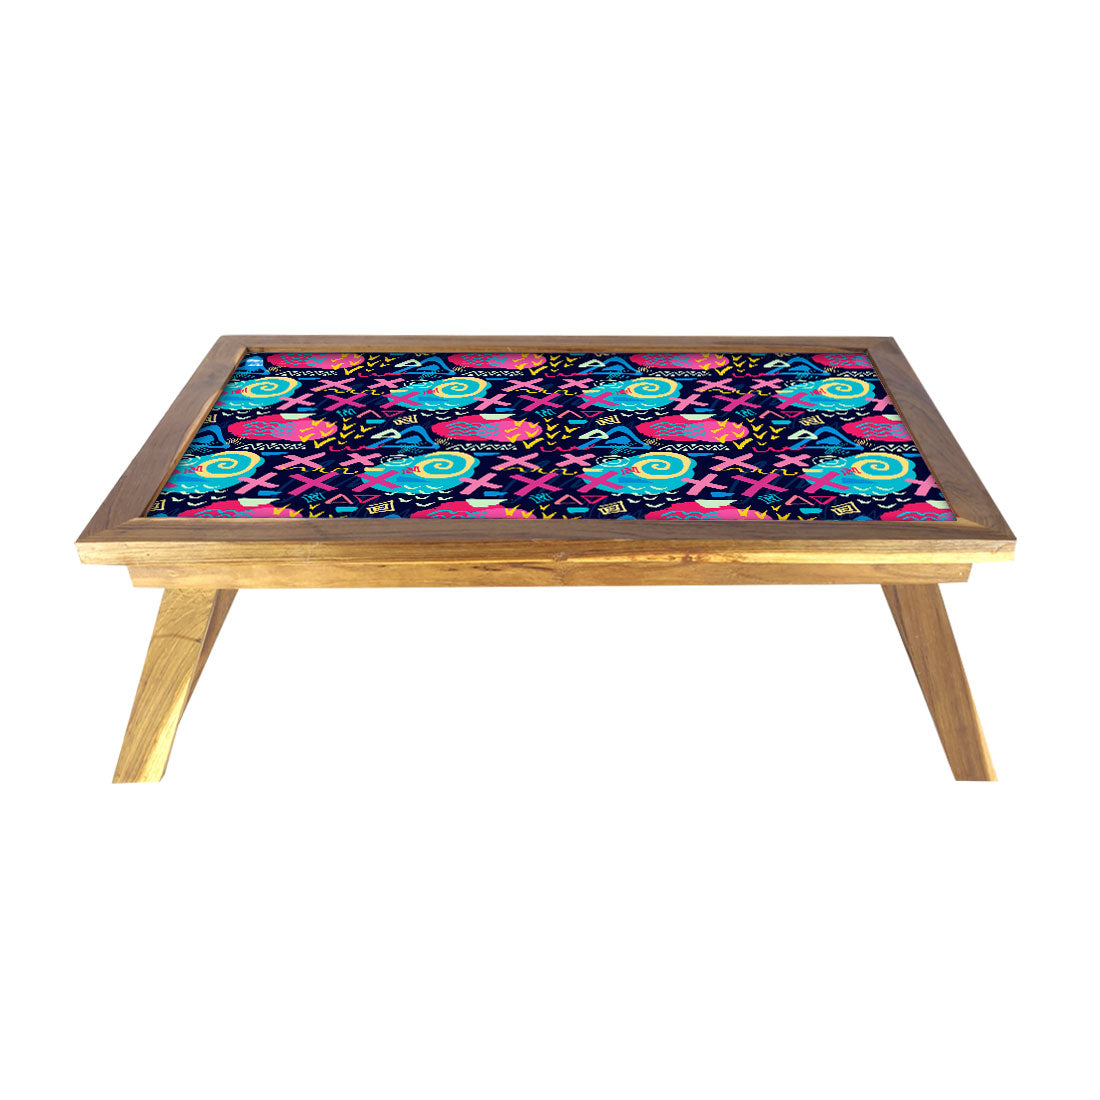 Wooden Folding Breakfast in Bed Serving Tray for Home - Colorful Pattern Nutcase